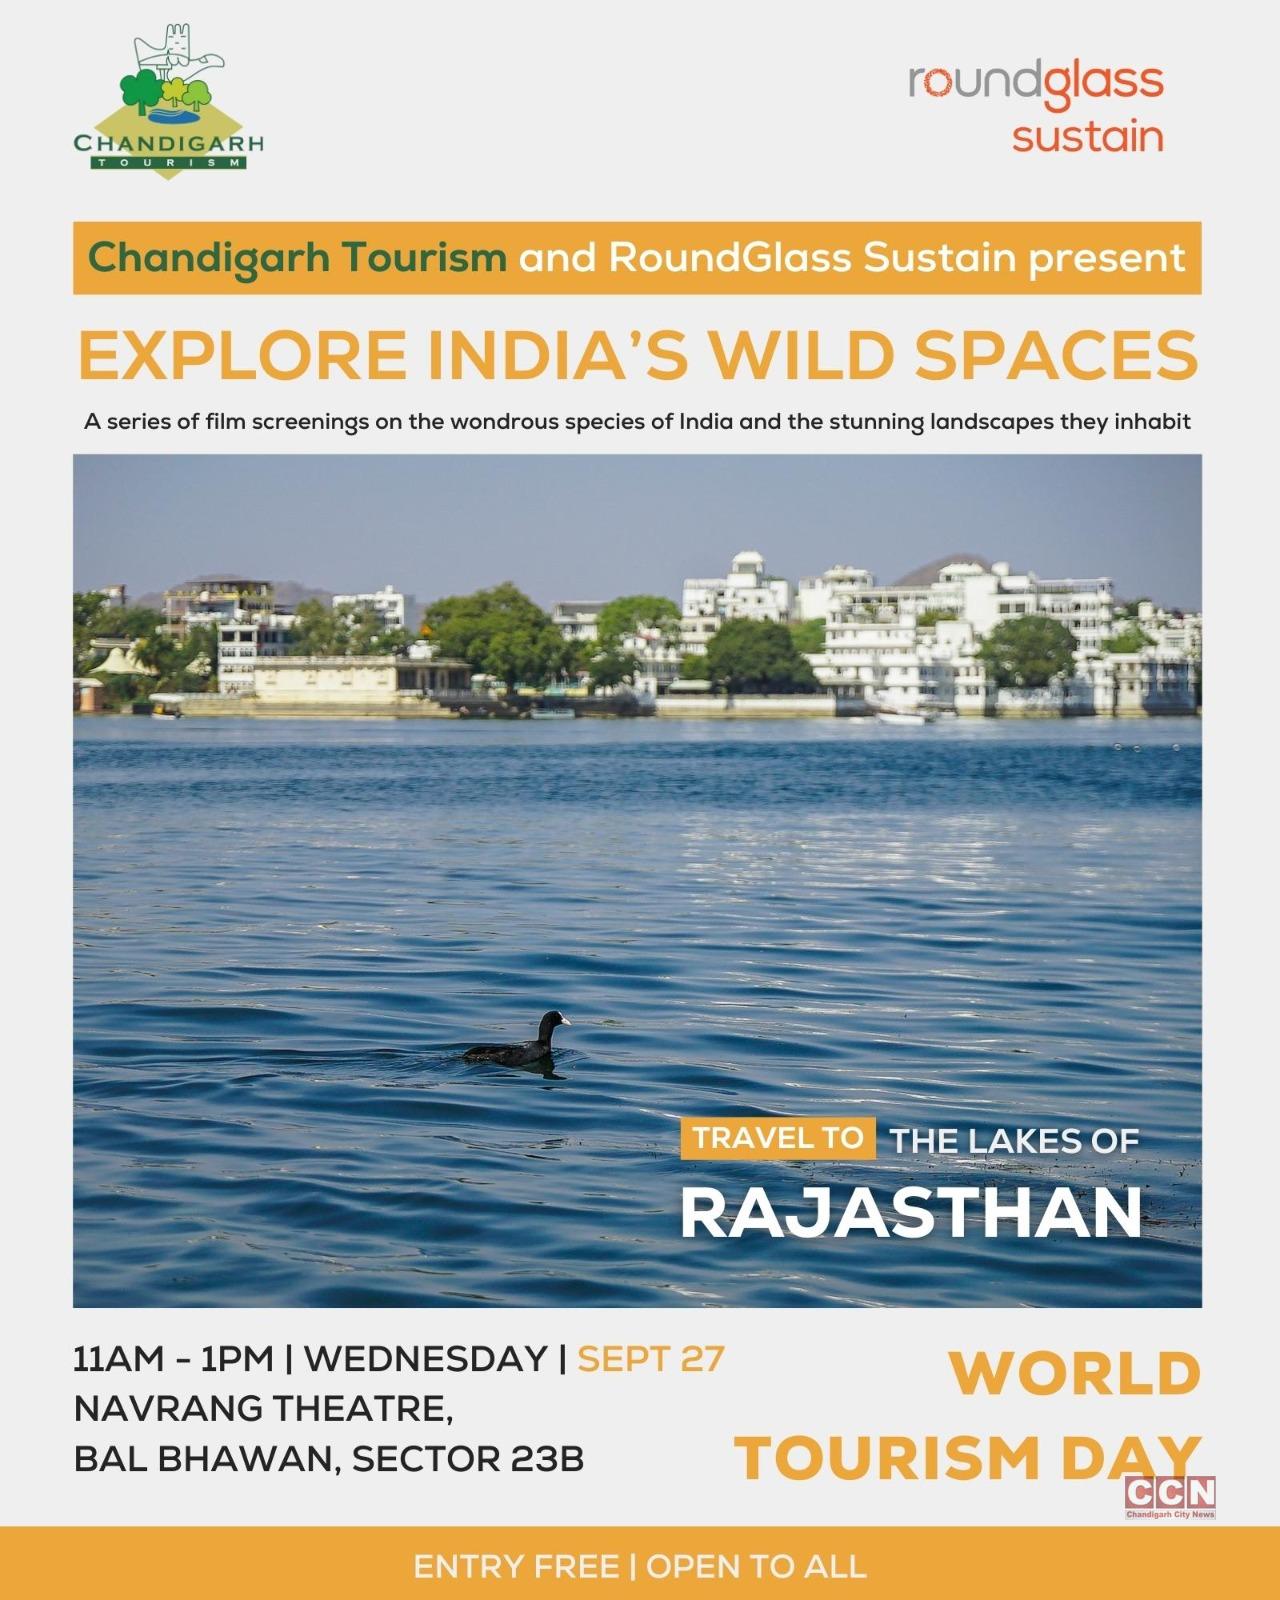  Chandigarh Tourism and RoundGlass Sustain partner to promote sustainable travel